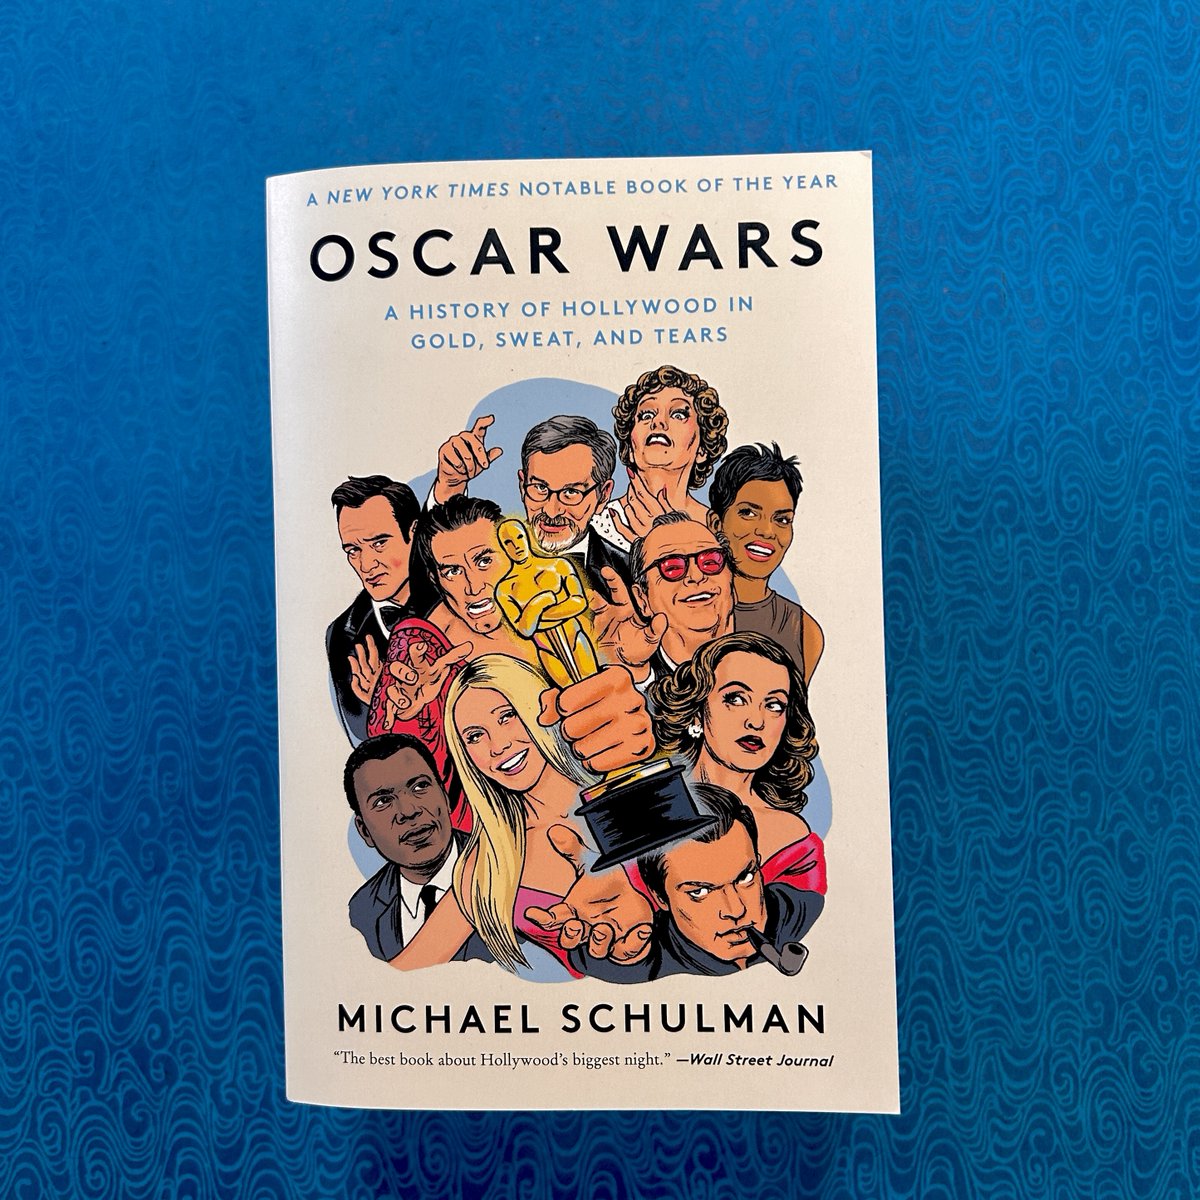 95 years ago today, the very first Academy Awards were held at the Hollywood Roosevelt Hotel. Dive into more Oscars history with Michael Schulman's OSCAR WARS!